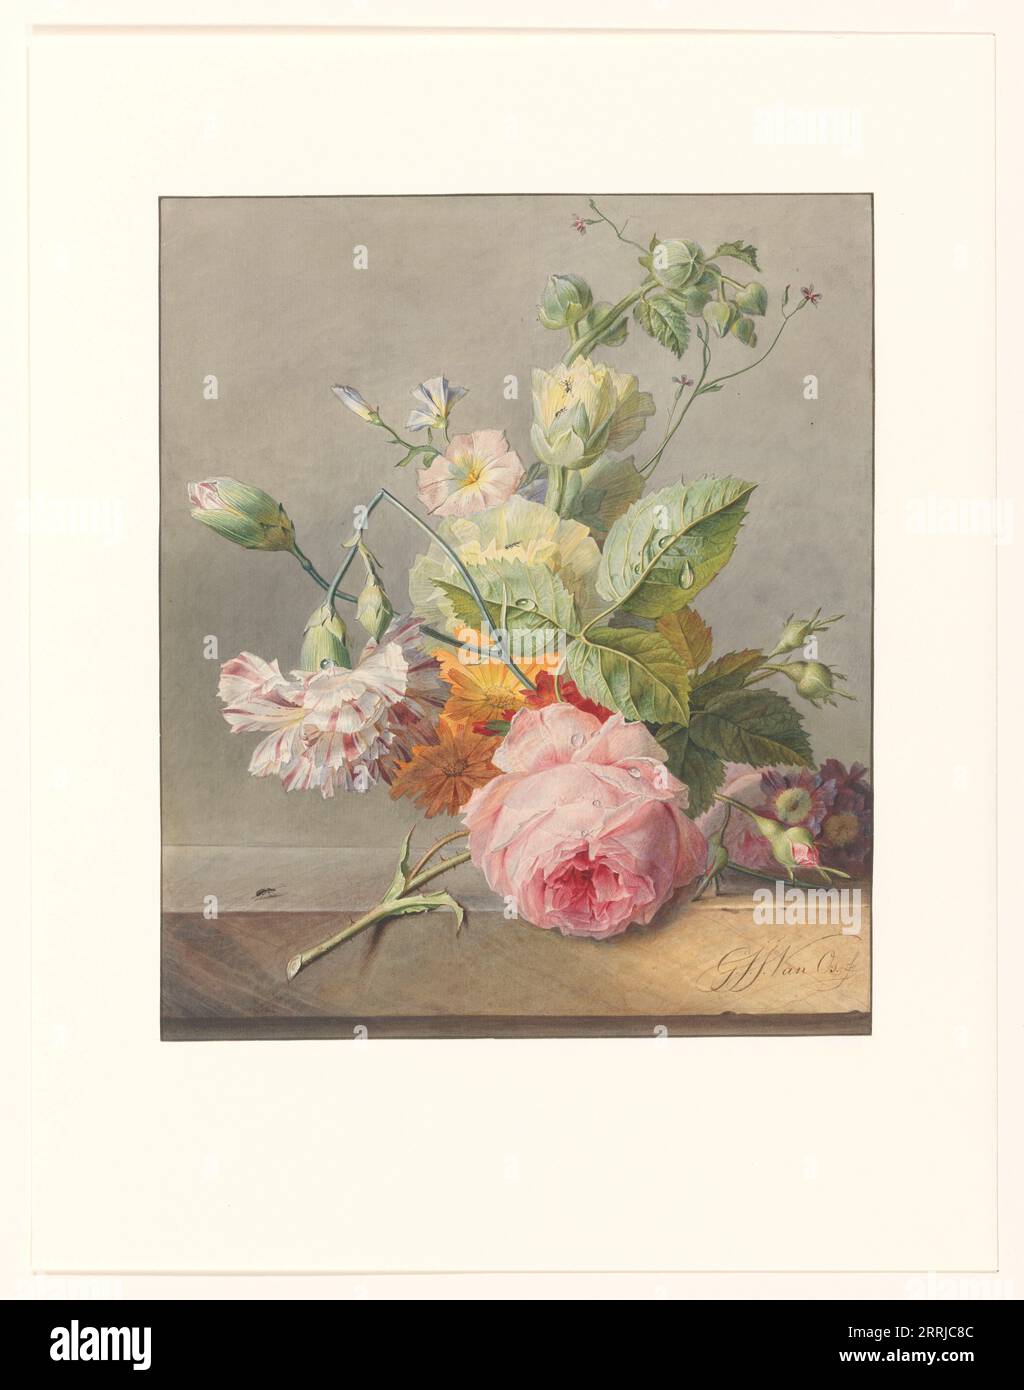 Floral Still Life, c.1800-c.1825. Georgius van Os painted his flowers in bright colours, with crisp contours and little attention to light and shade, entirely in keeping with the taste of his time. The uniform grey background also contributes to the still life's distinct character. The watercolour can be compared to the still lifes Van Os painted on porcelain in the famous factory in S&#xe8;vres near Paris. Stock Photo